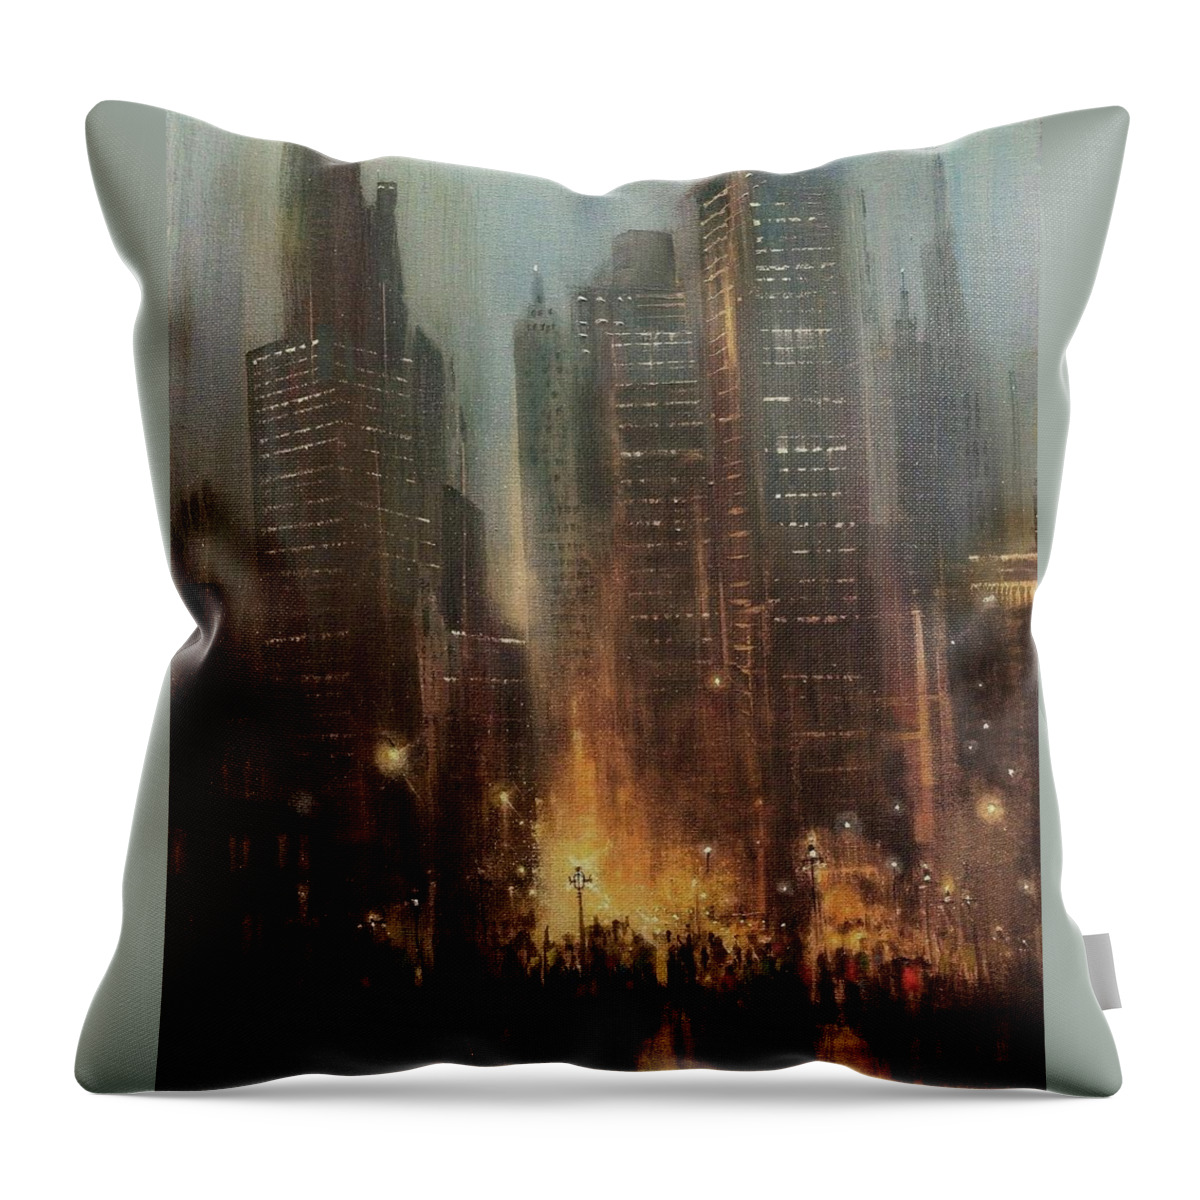 City Scene Throw Pillow featuring the painting City Rain by Tom Shropshire